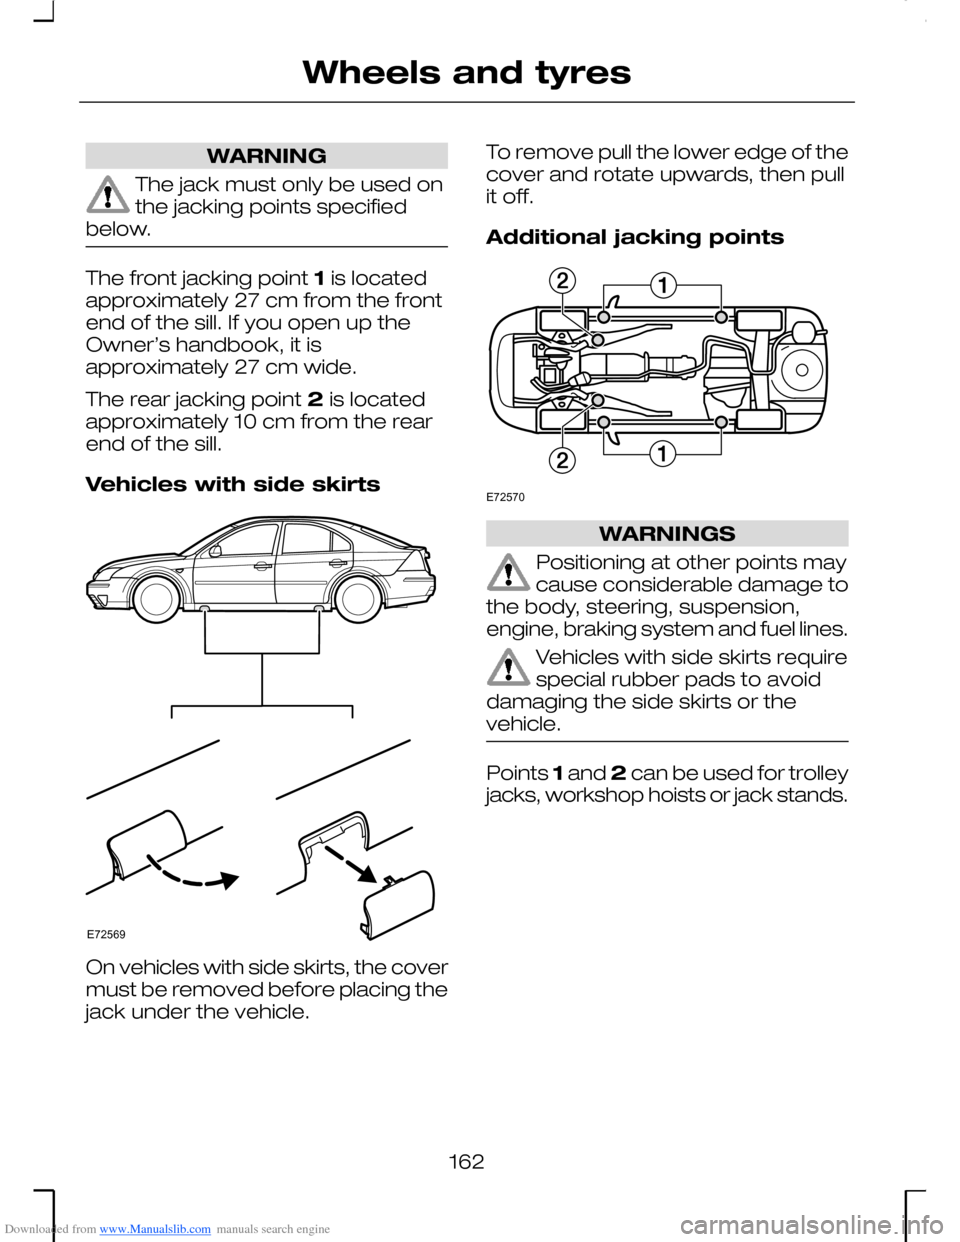 FORD MONDEO 2006 2.G Owners Manual Downloaded from www.Manualslib.com manuals search engine WARNING
The jack must only be used onthe jacking points specifiedbelow.
The front jacking point 1 is locatedapproximately 27 cm from the fronte